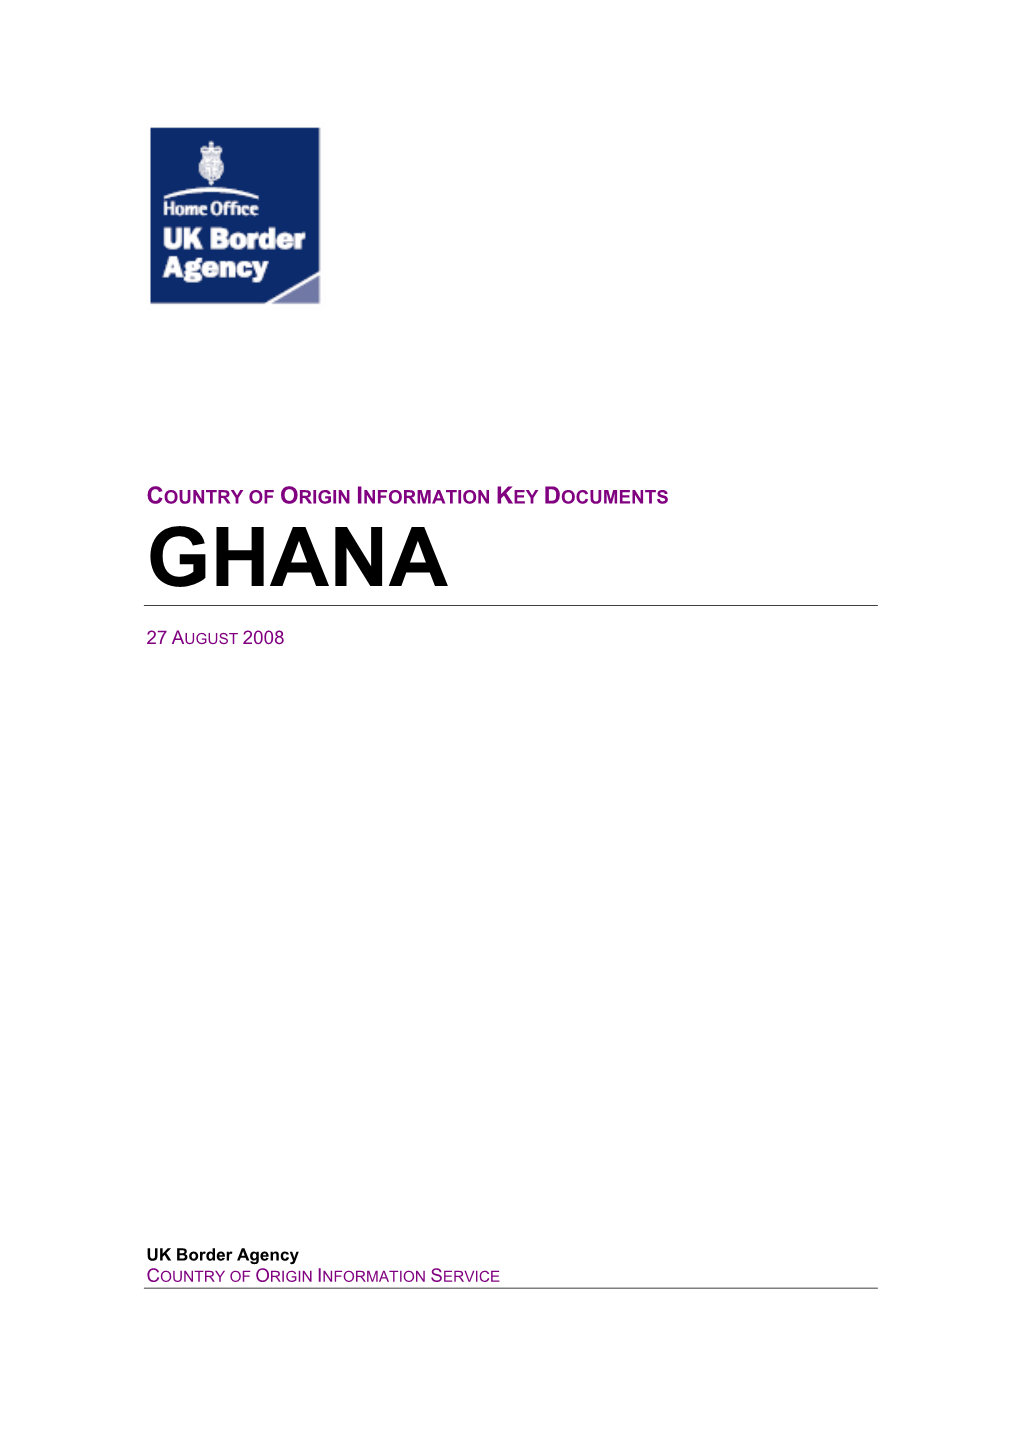 Country of Origin Information Key Documents Ghana August 2008